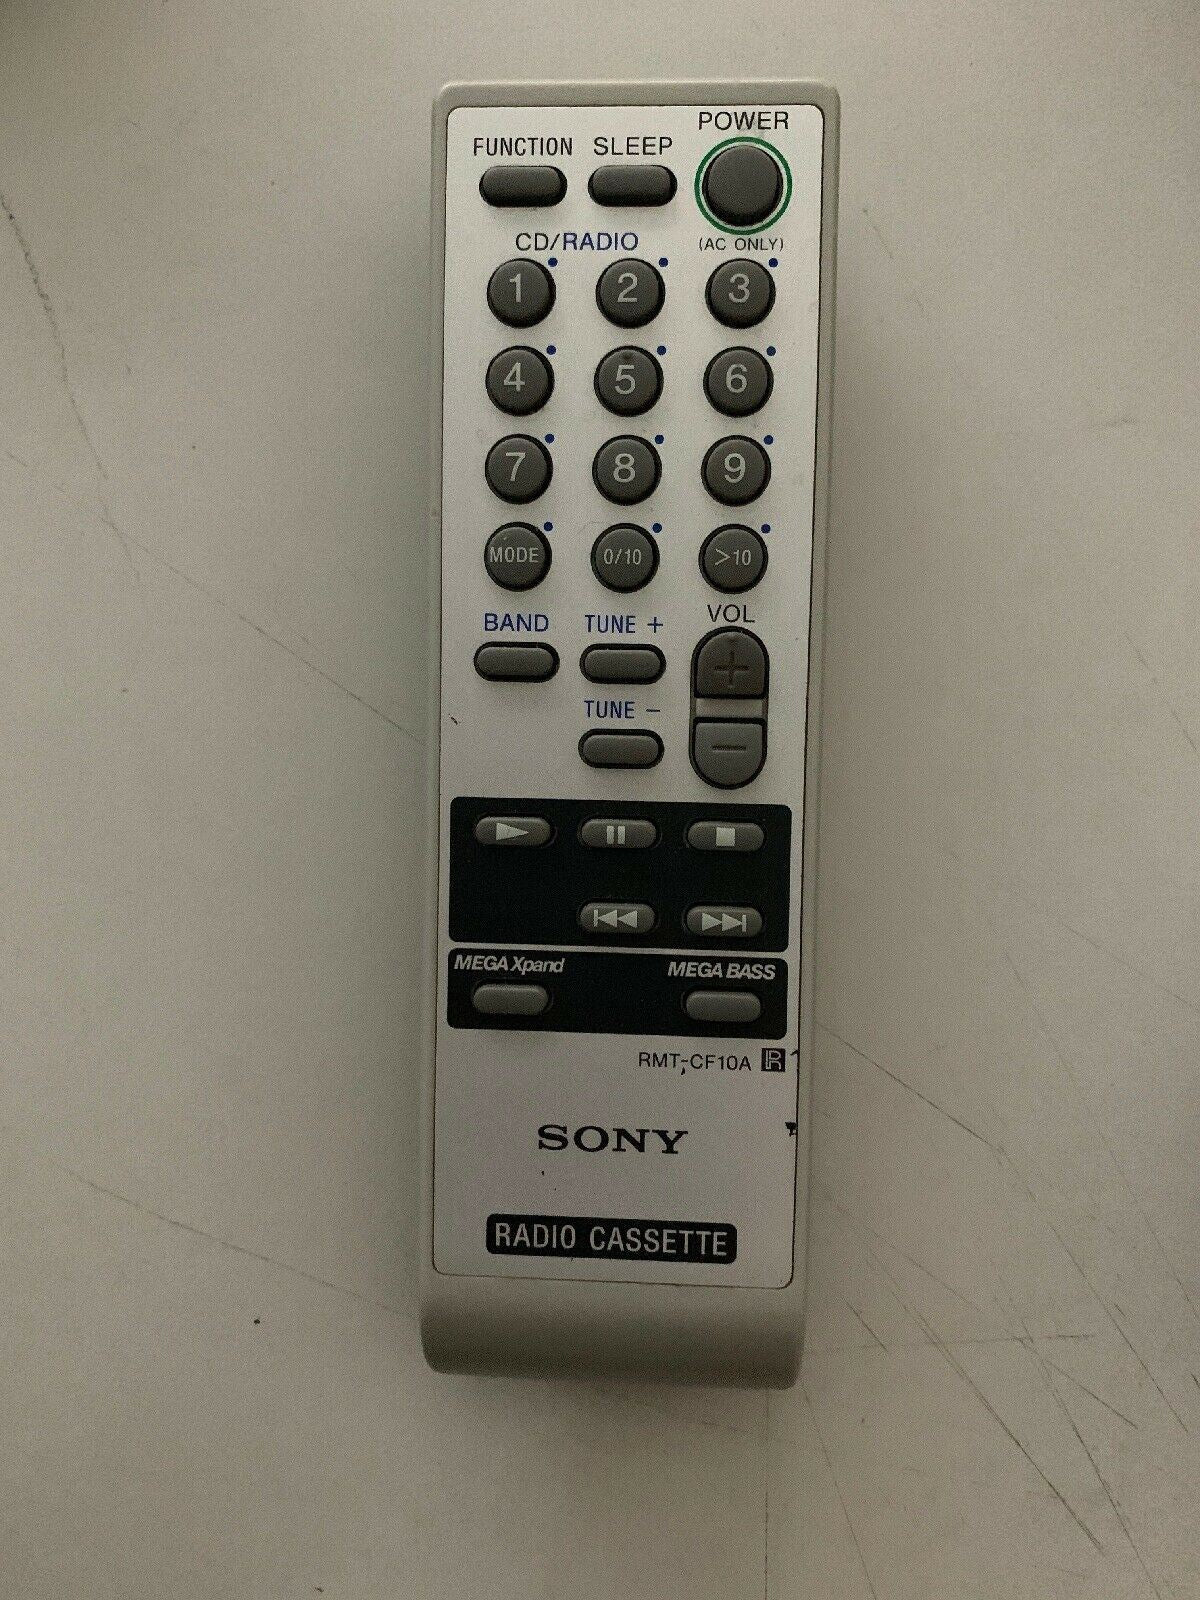 Sony RMT-CF10A Remote Control For Radio Cassette